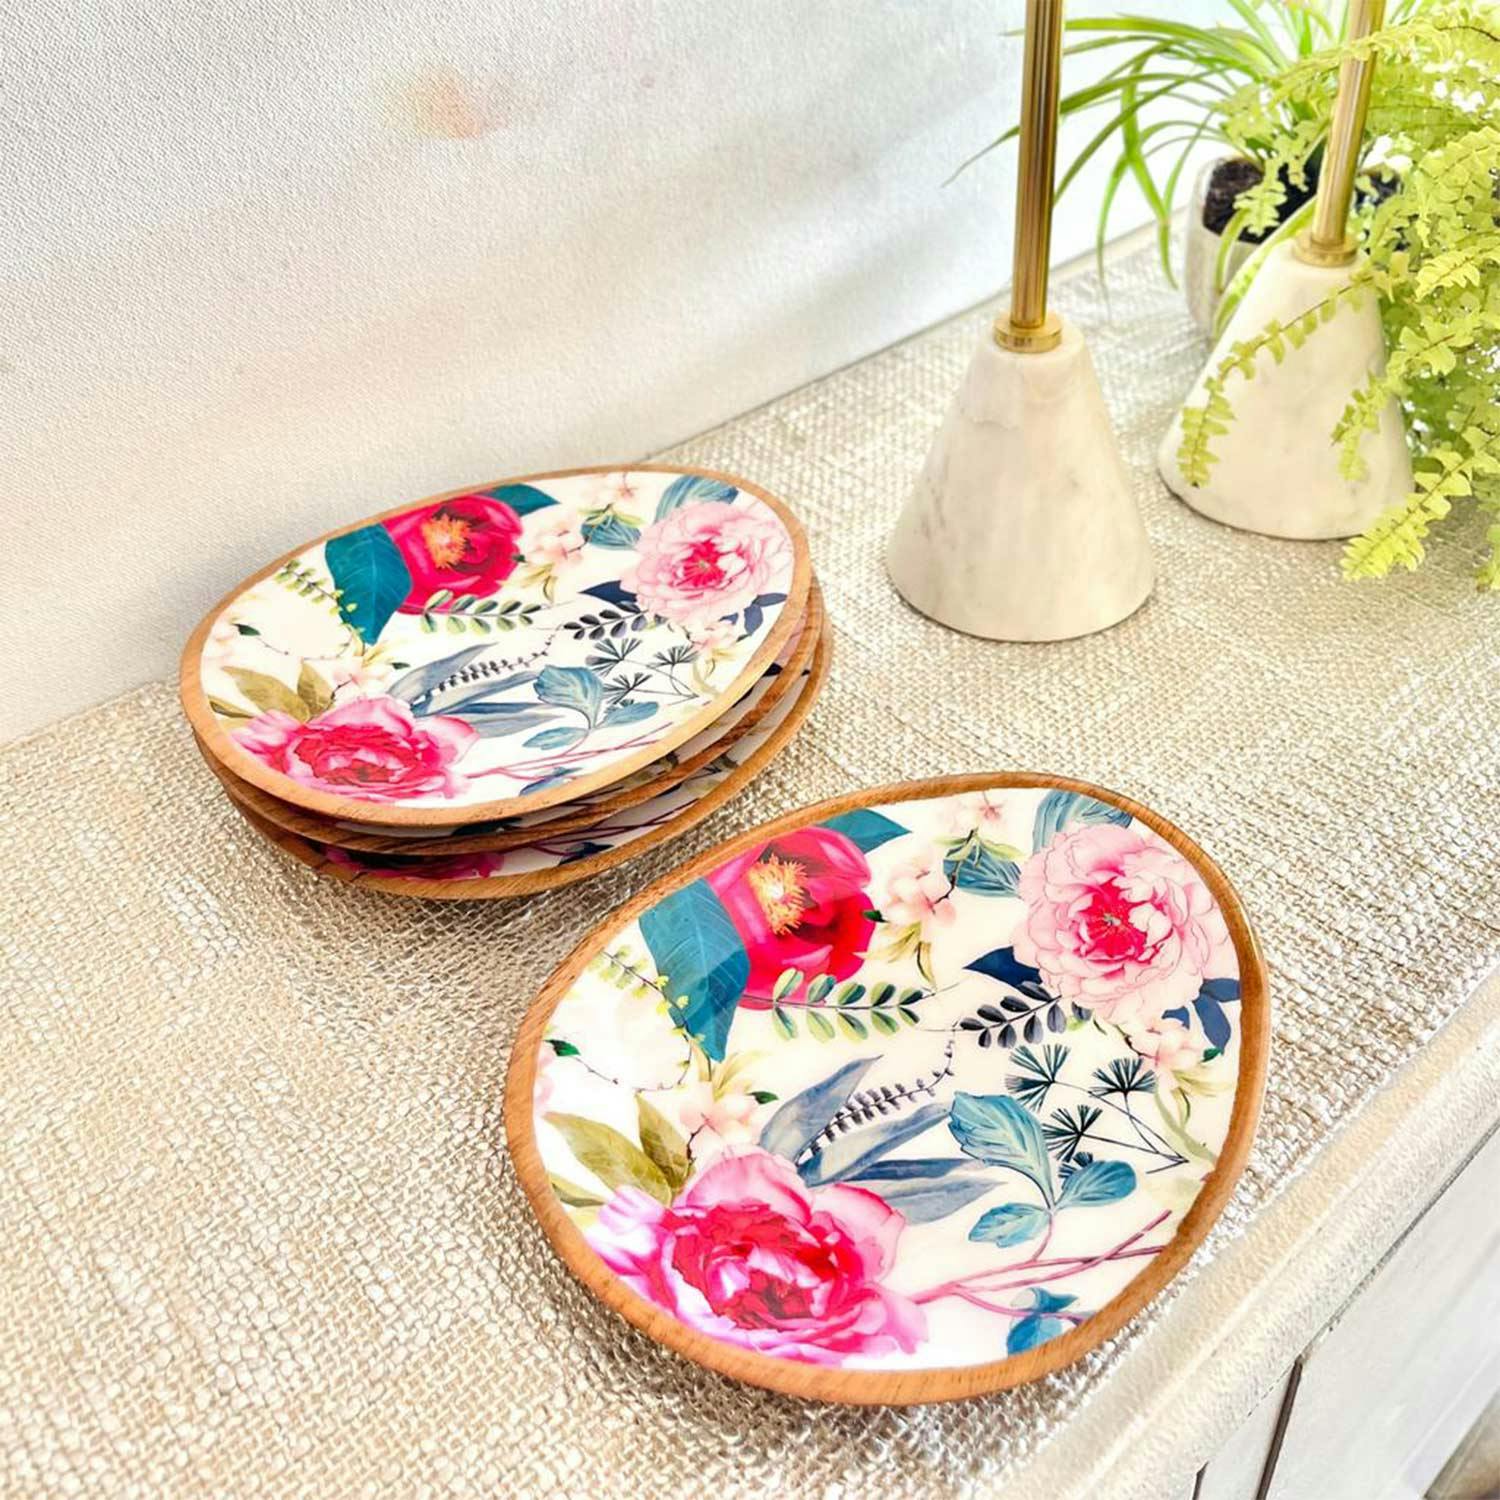 Mini Oval Plates, Set of 4 - Tudor Blooms, a product by Faaya Gifting